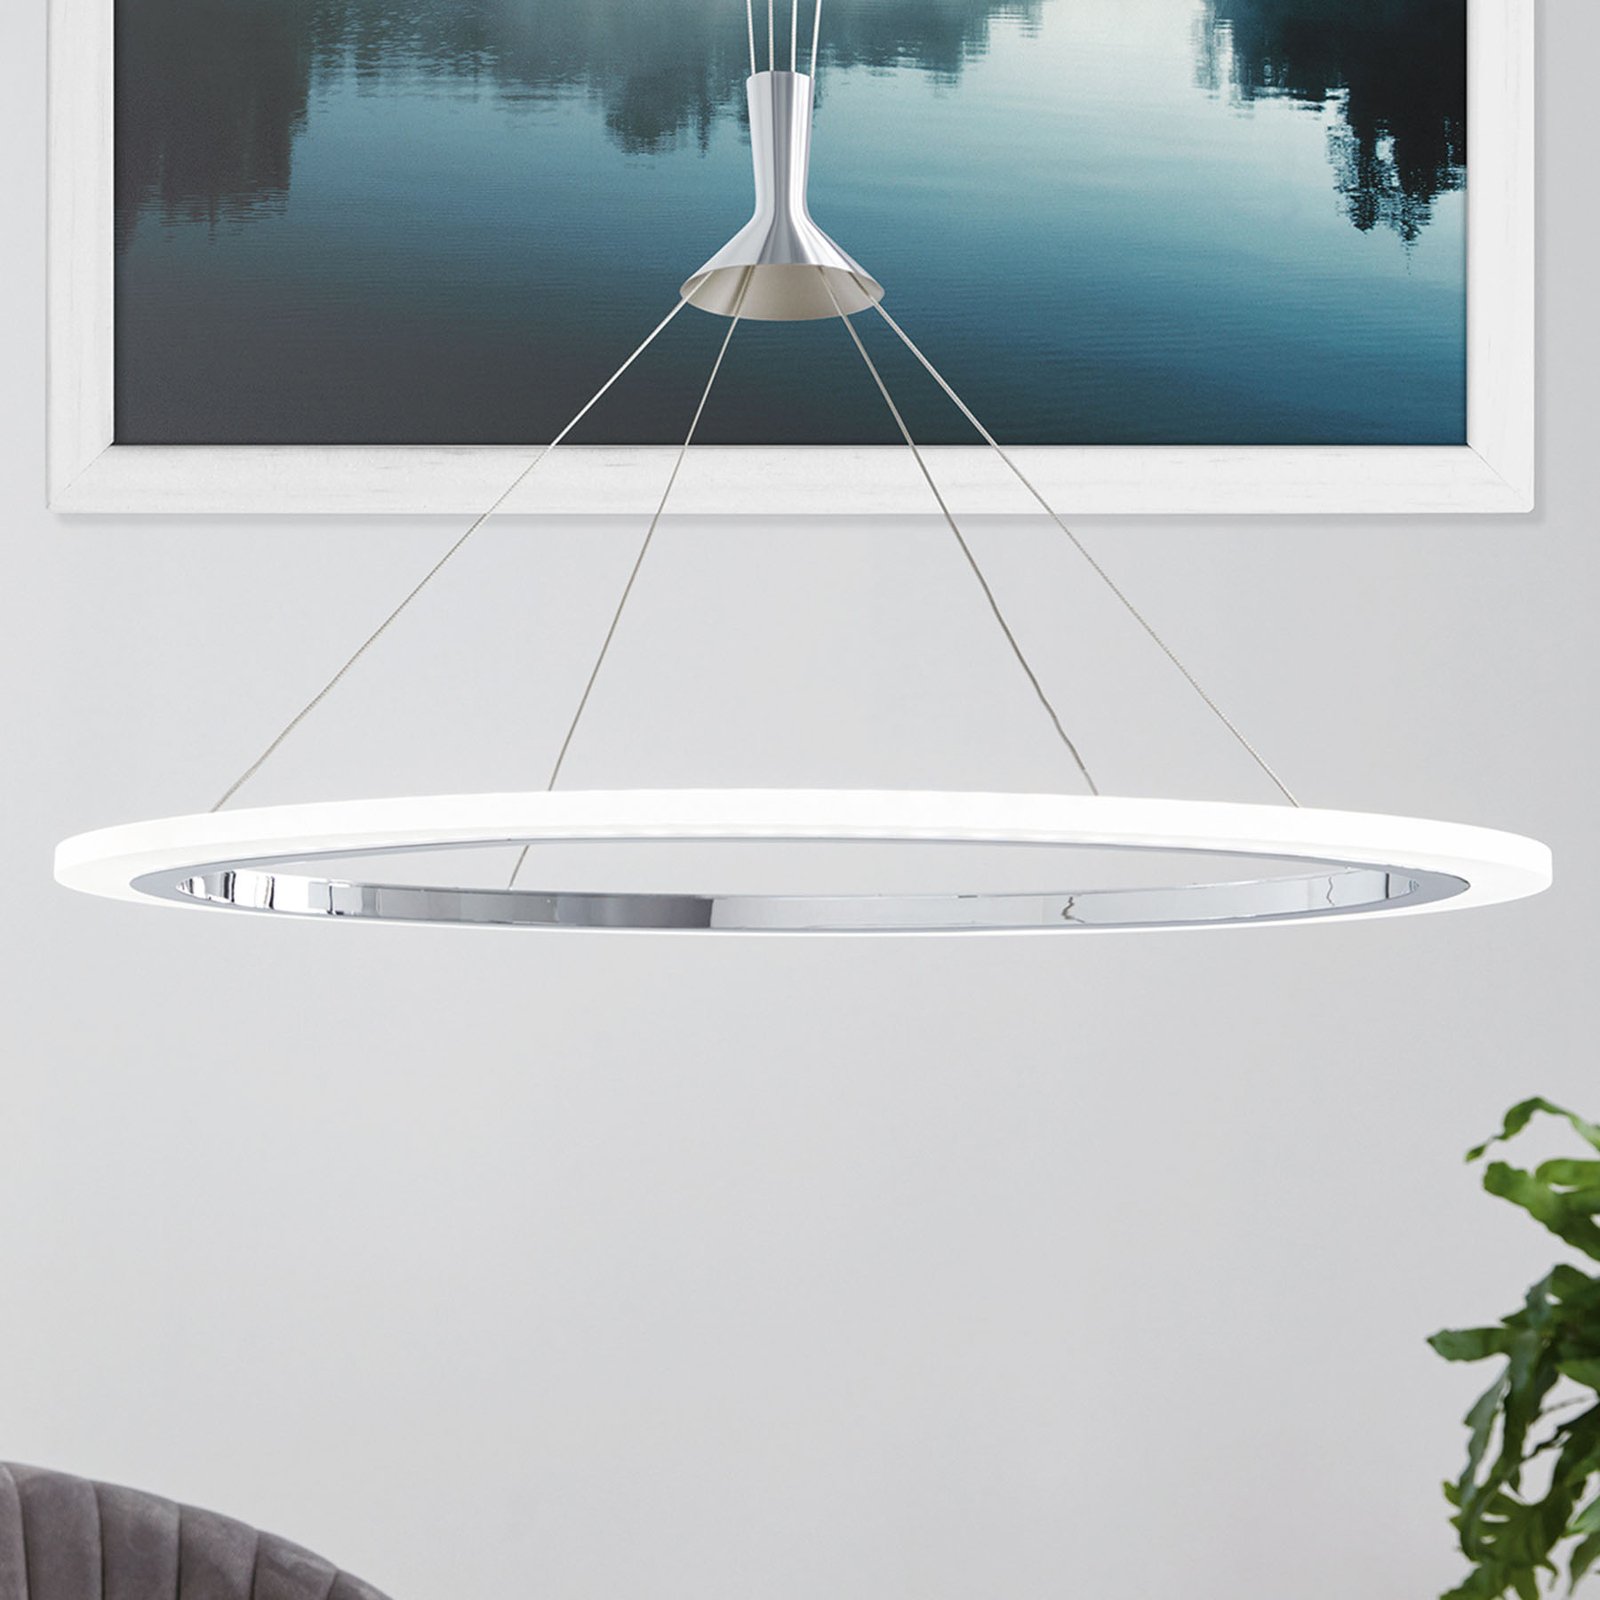 Overgang Artiest plannen EGLO connect Hornitos-C LED hanglamp, rond | Lampen24.be